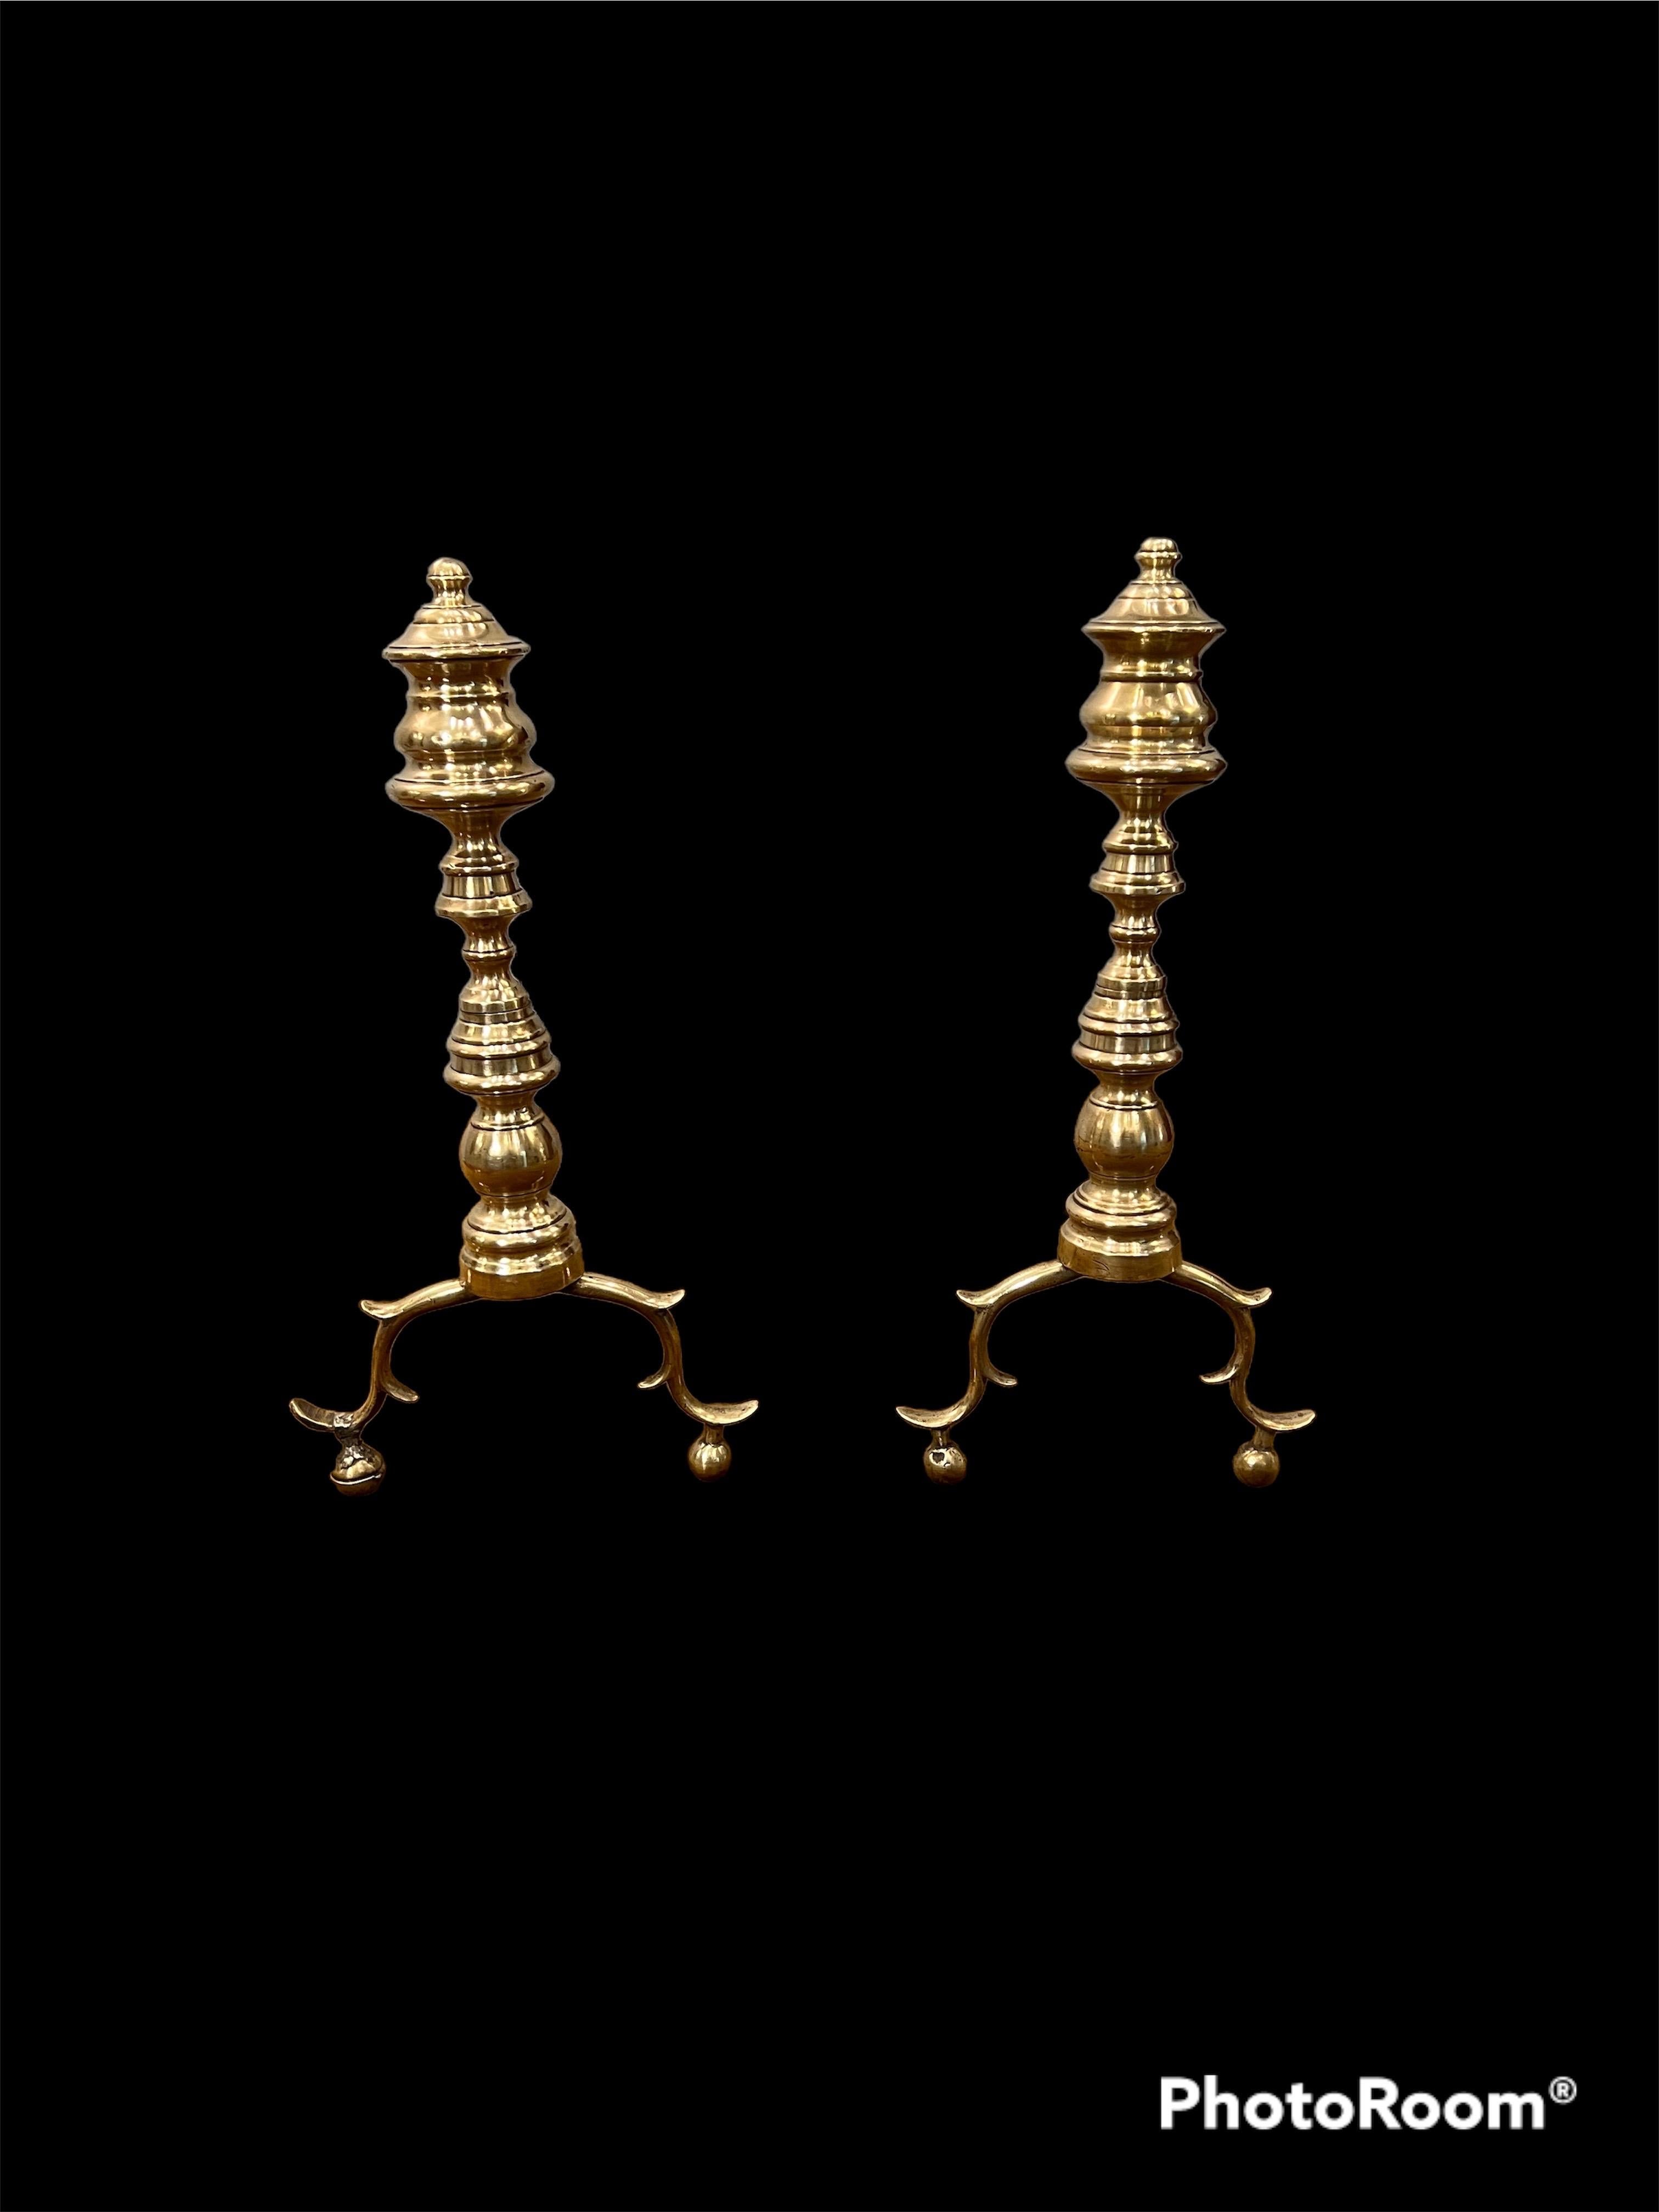 A Pair of American Federal Period finial form brass andirons, both showing turned finial capitals on sectional columns rising from double spurred and hipped supports, both retaining their original forged iron 'dogs',

The brass having a fine